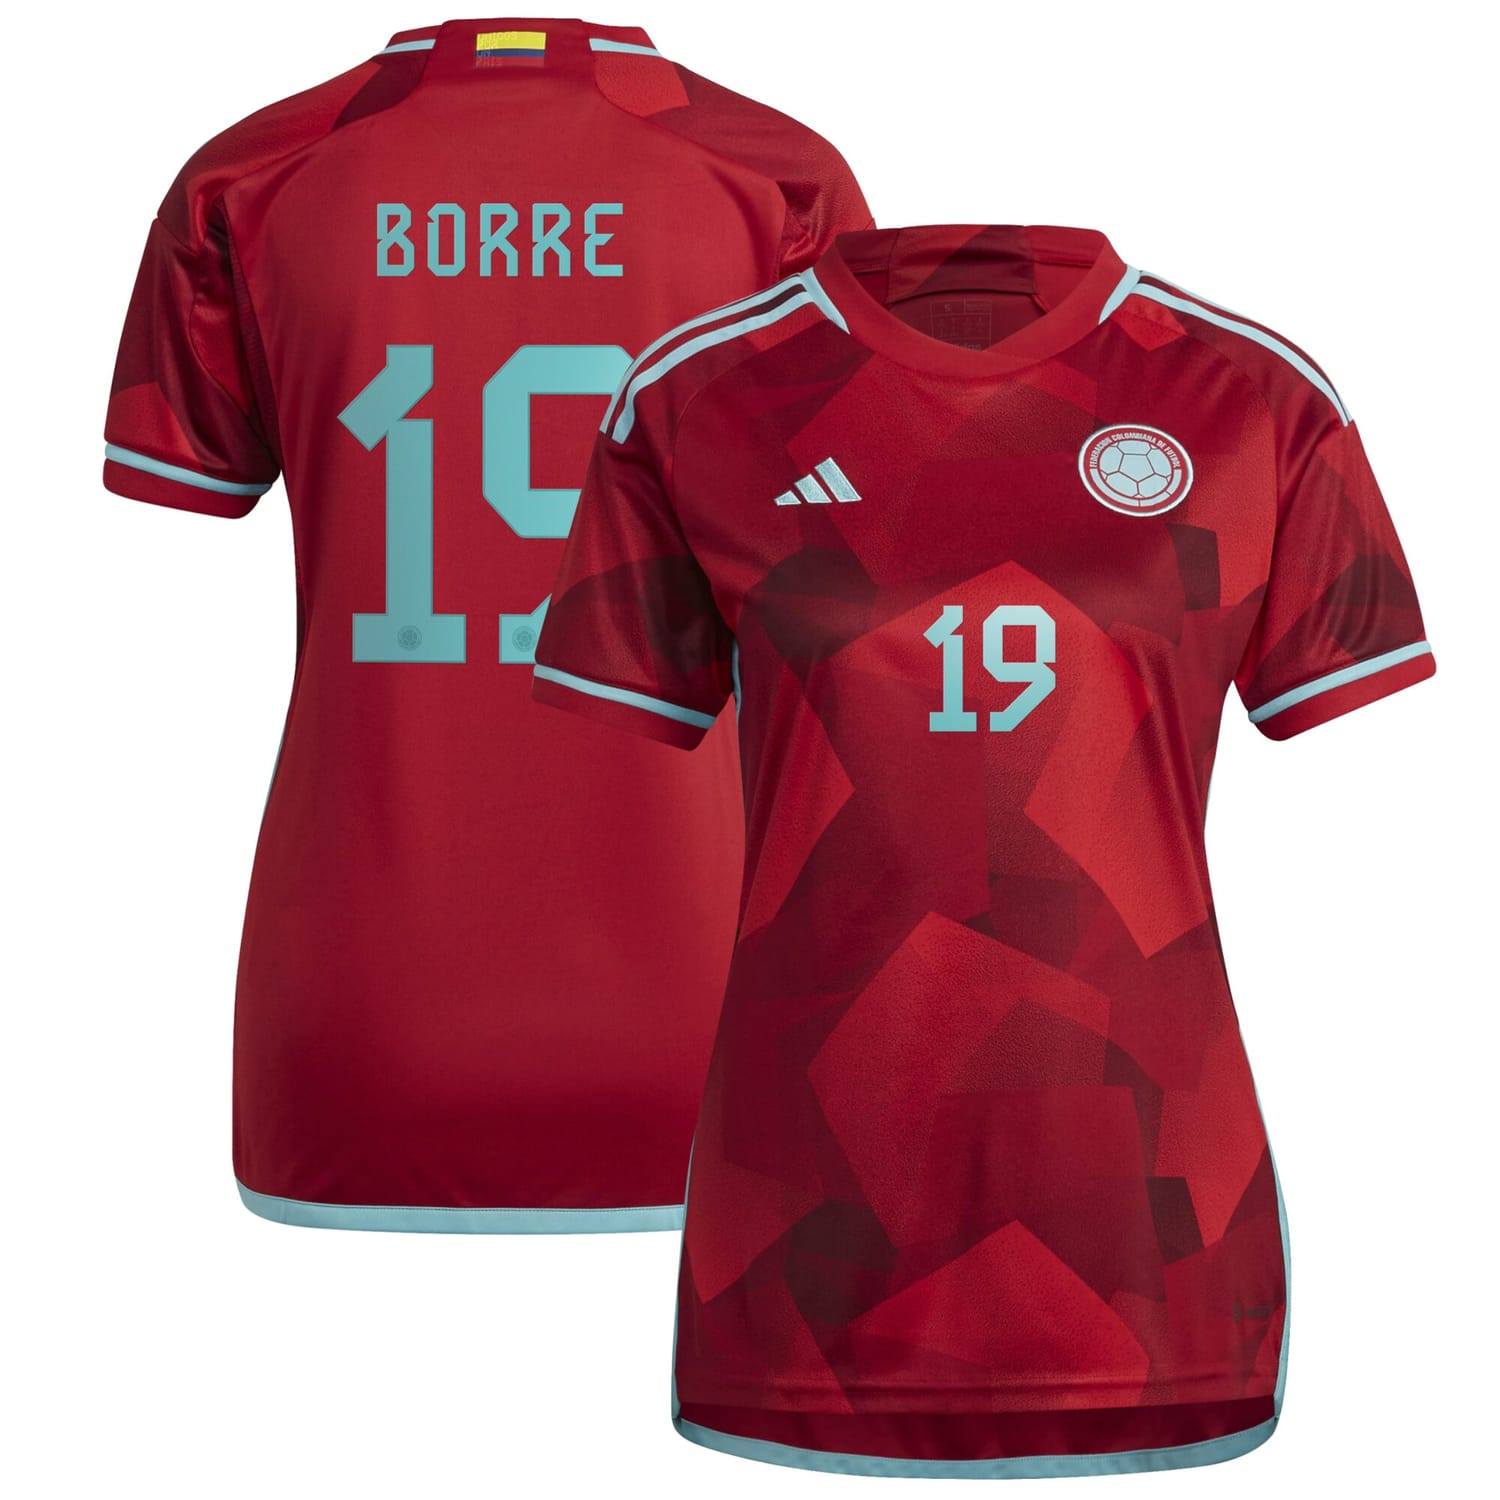 Colombia National Team Away Jersey Shirt Red 2022-23 player Rafael Borré printing for Women